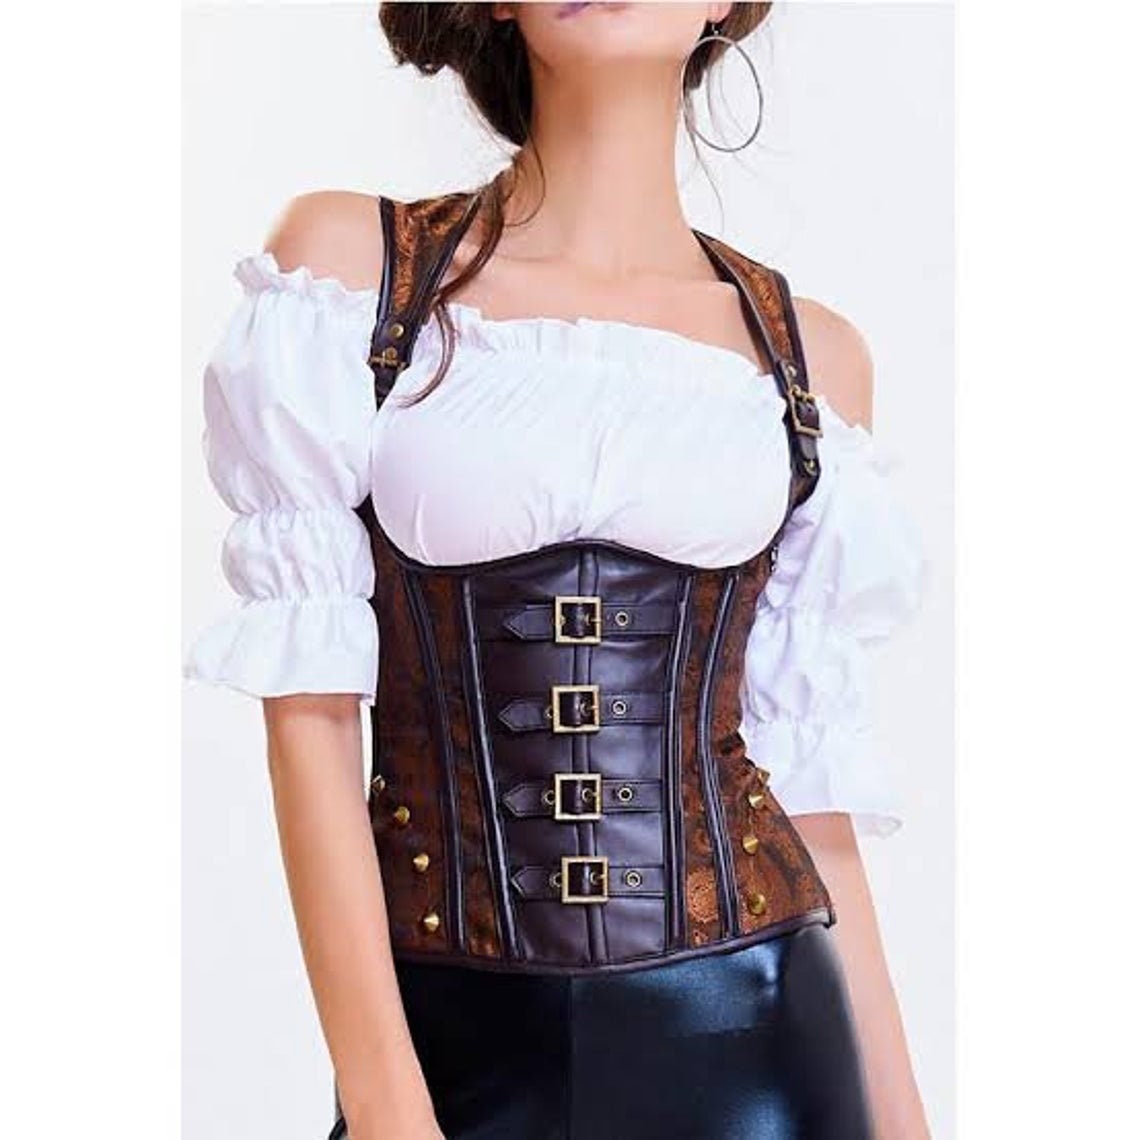 Women Steampunk Corset Top Sexy Bustier Gothic Overbust Leather